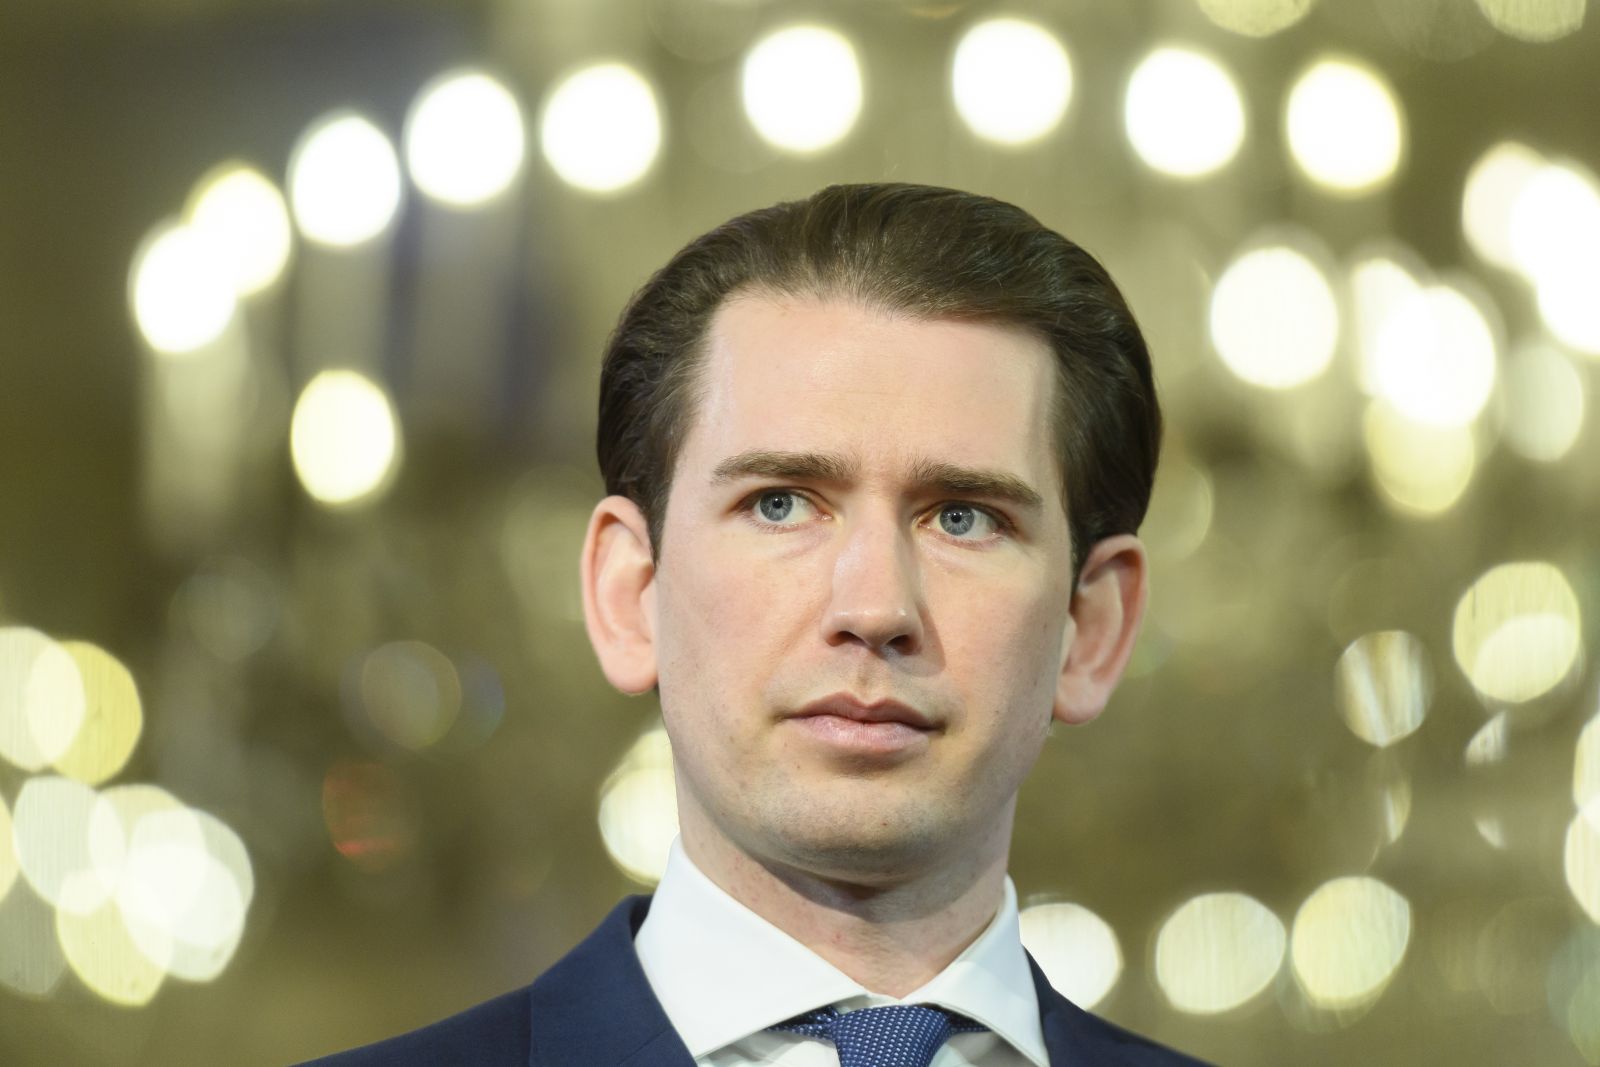 epa09145648 Austrian Chancellor Sebastian Kurz delivers a press conference during a government meeting at the Hofburg Palace in Vienna, Austria, 19 April 2021.  EPA/CHRISTIAN BRUNA